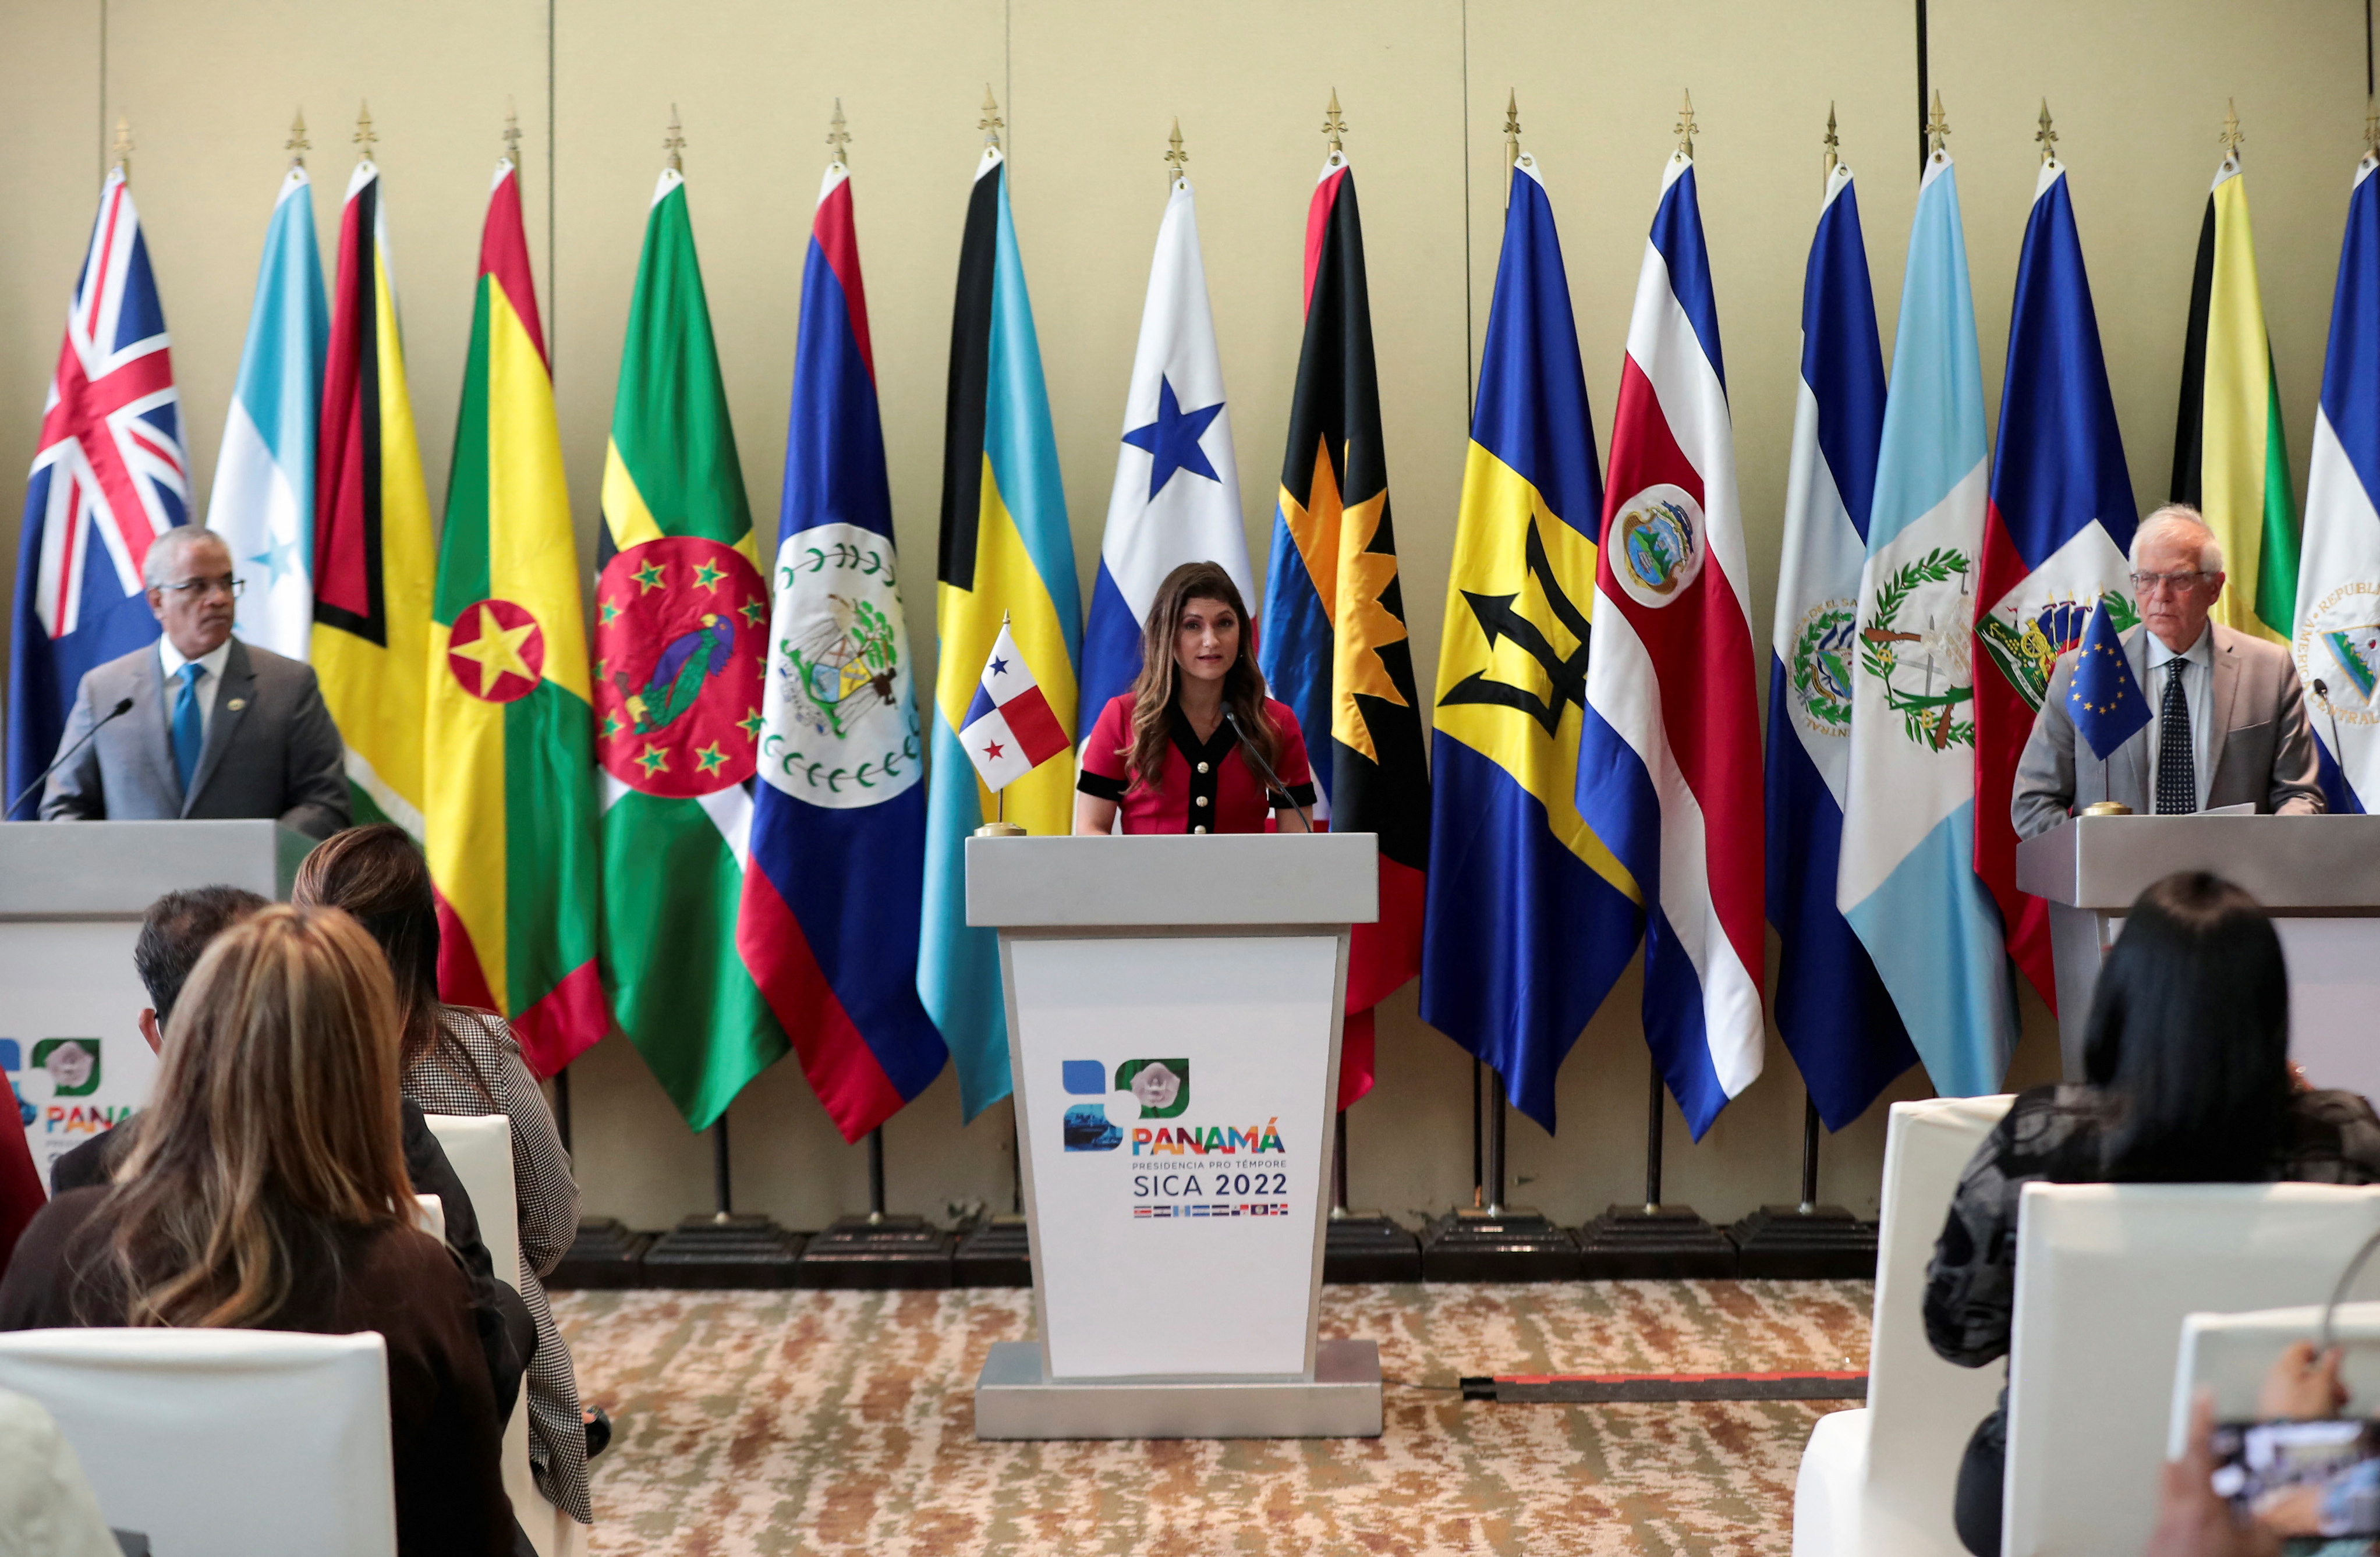 Panama's Foreign Minister Mouynes speaks next to Belice's Foreign Minister Courtenay and High Representative of the European Union for Foreign Affairs and Security Policy Borrell during a news conference in Panama City